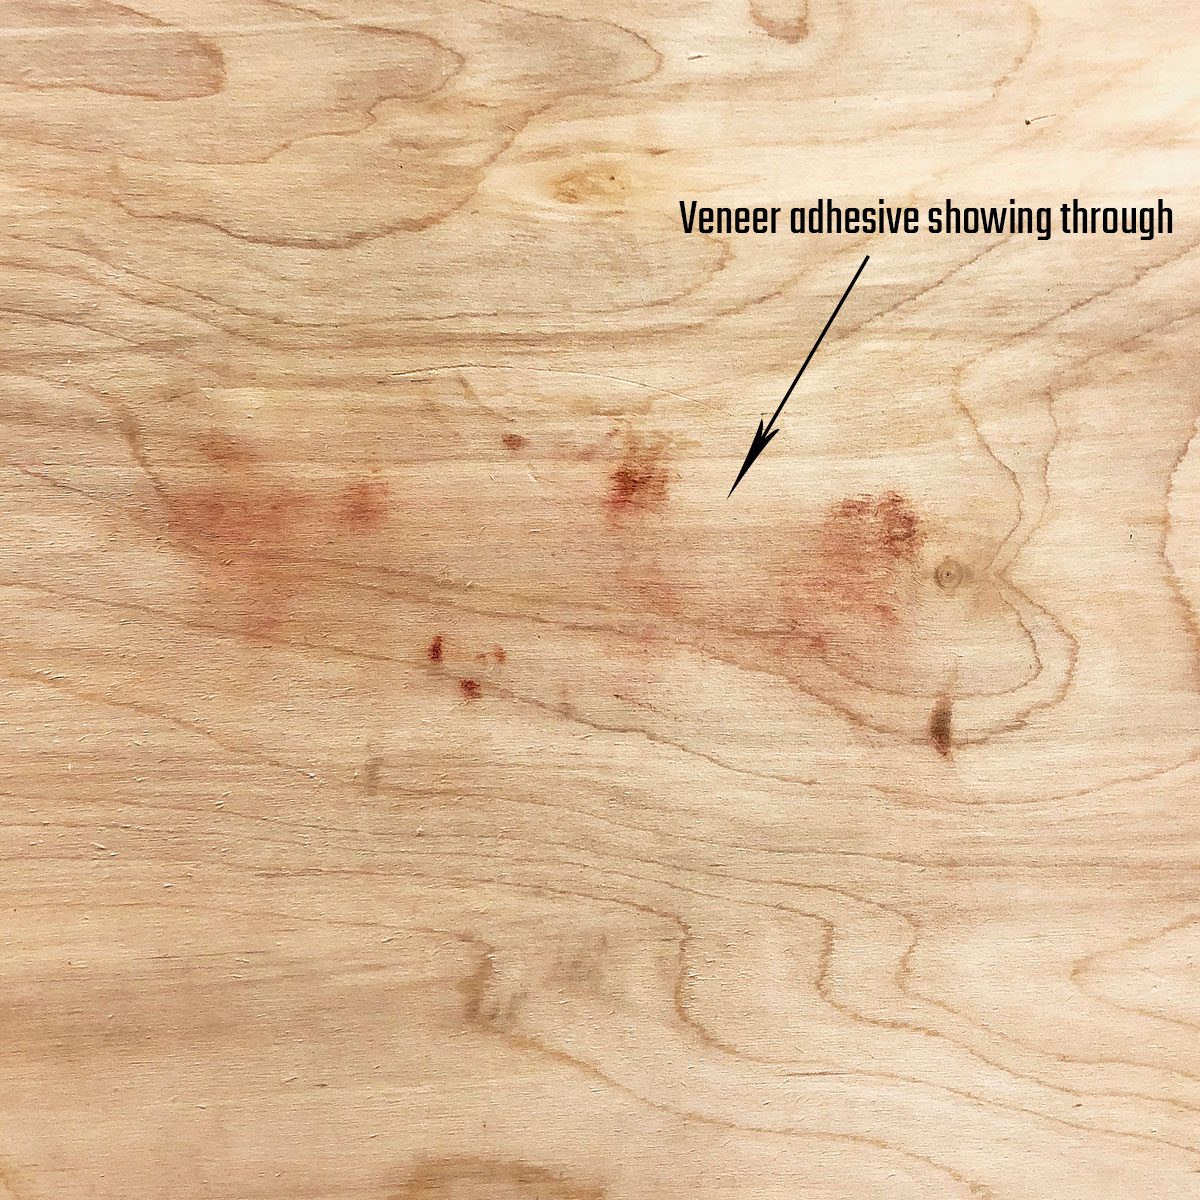 Adhesive showing through after sanding plywood | Construction Pro Tips